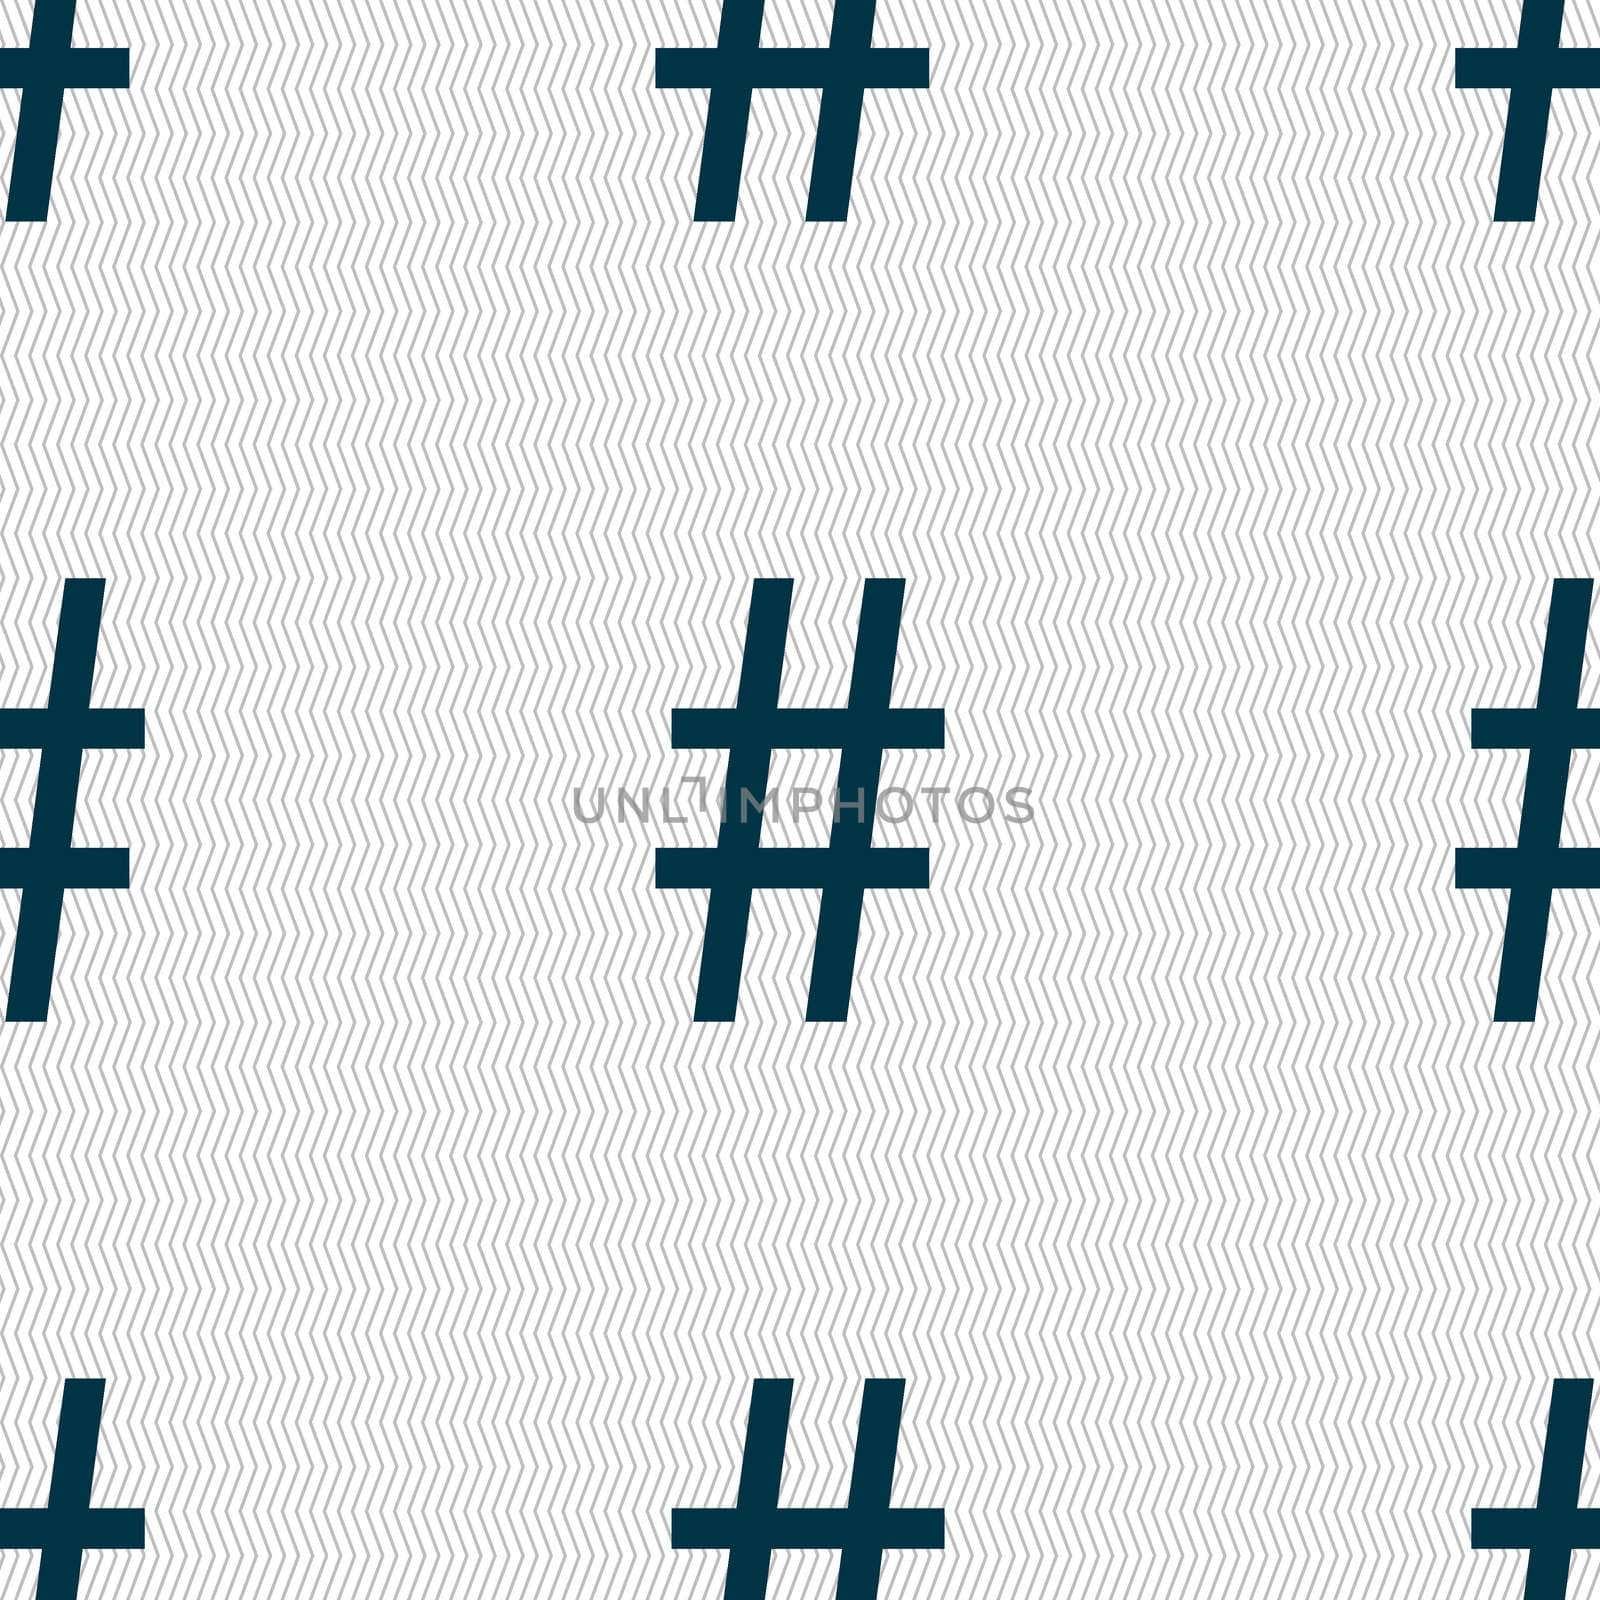 hash tag icon. Seamless abstract background with geometric shapes. illustration